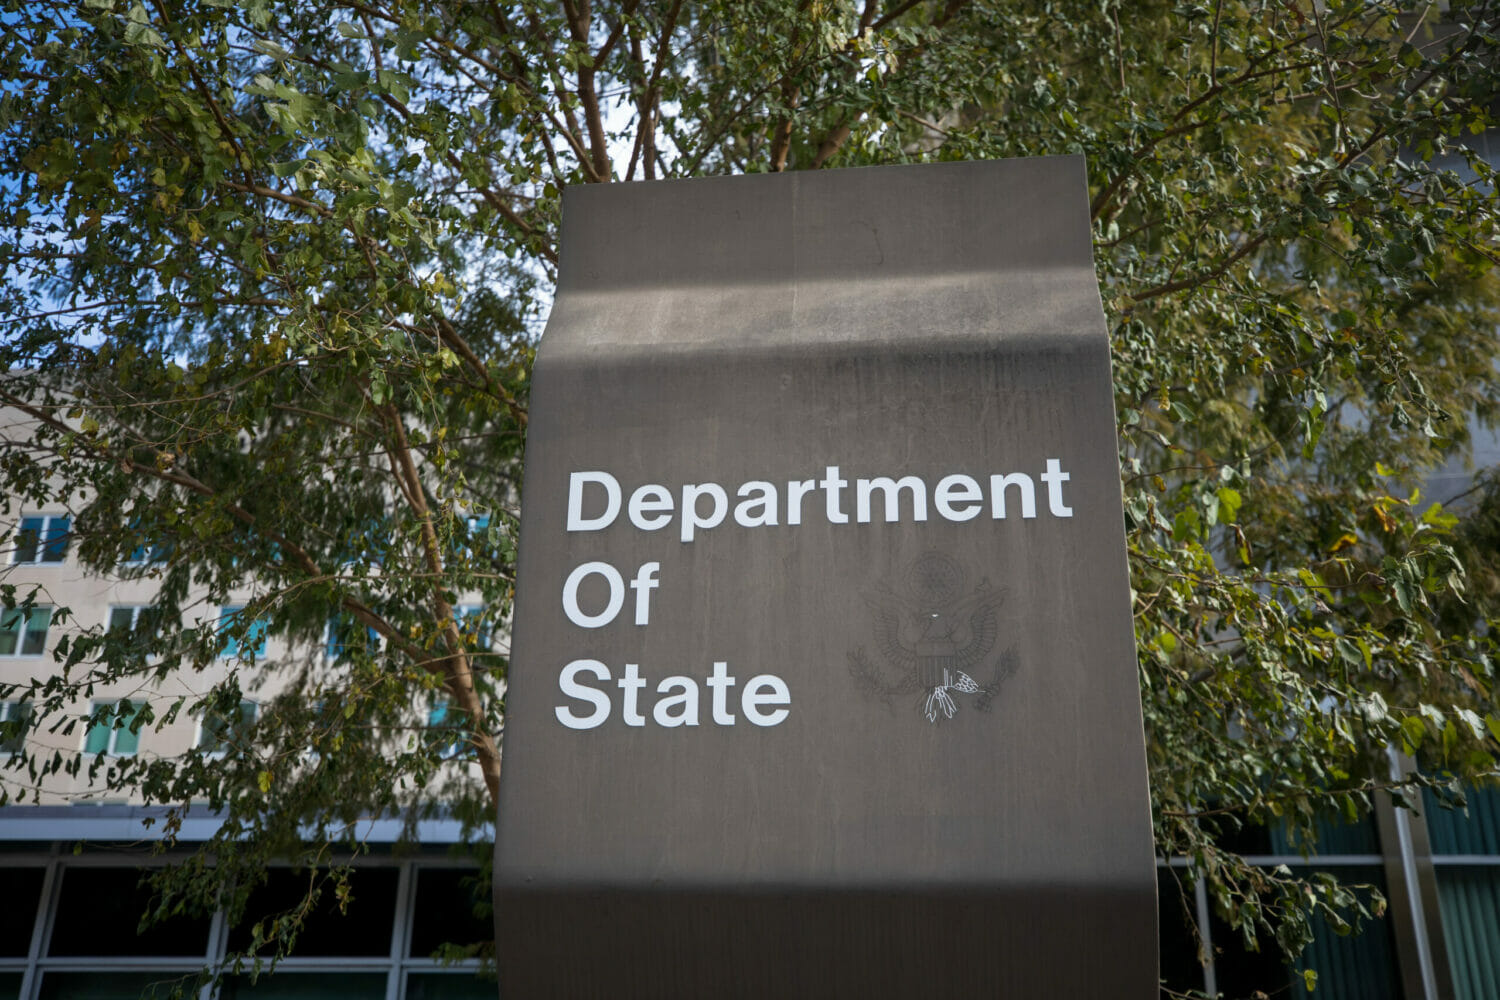 The Department of State building